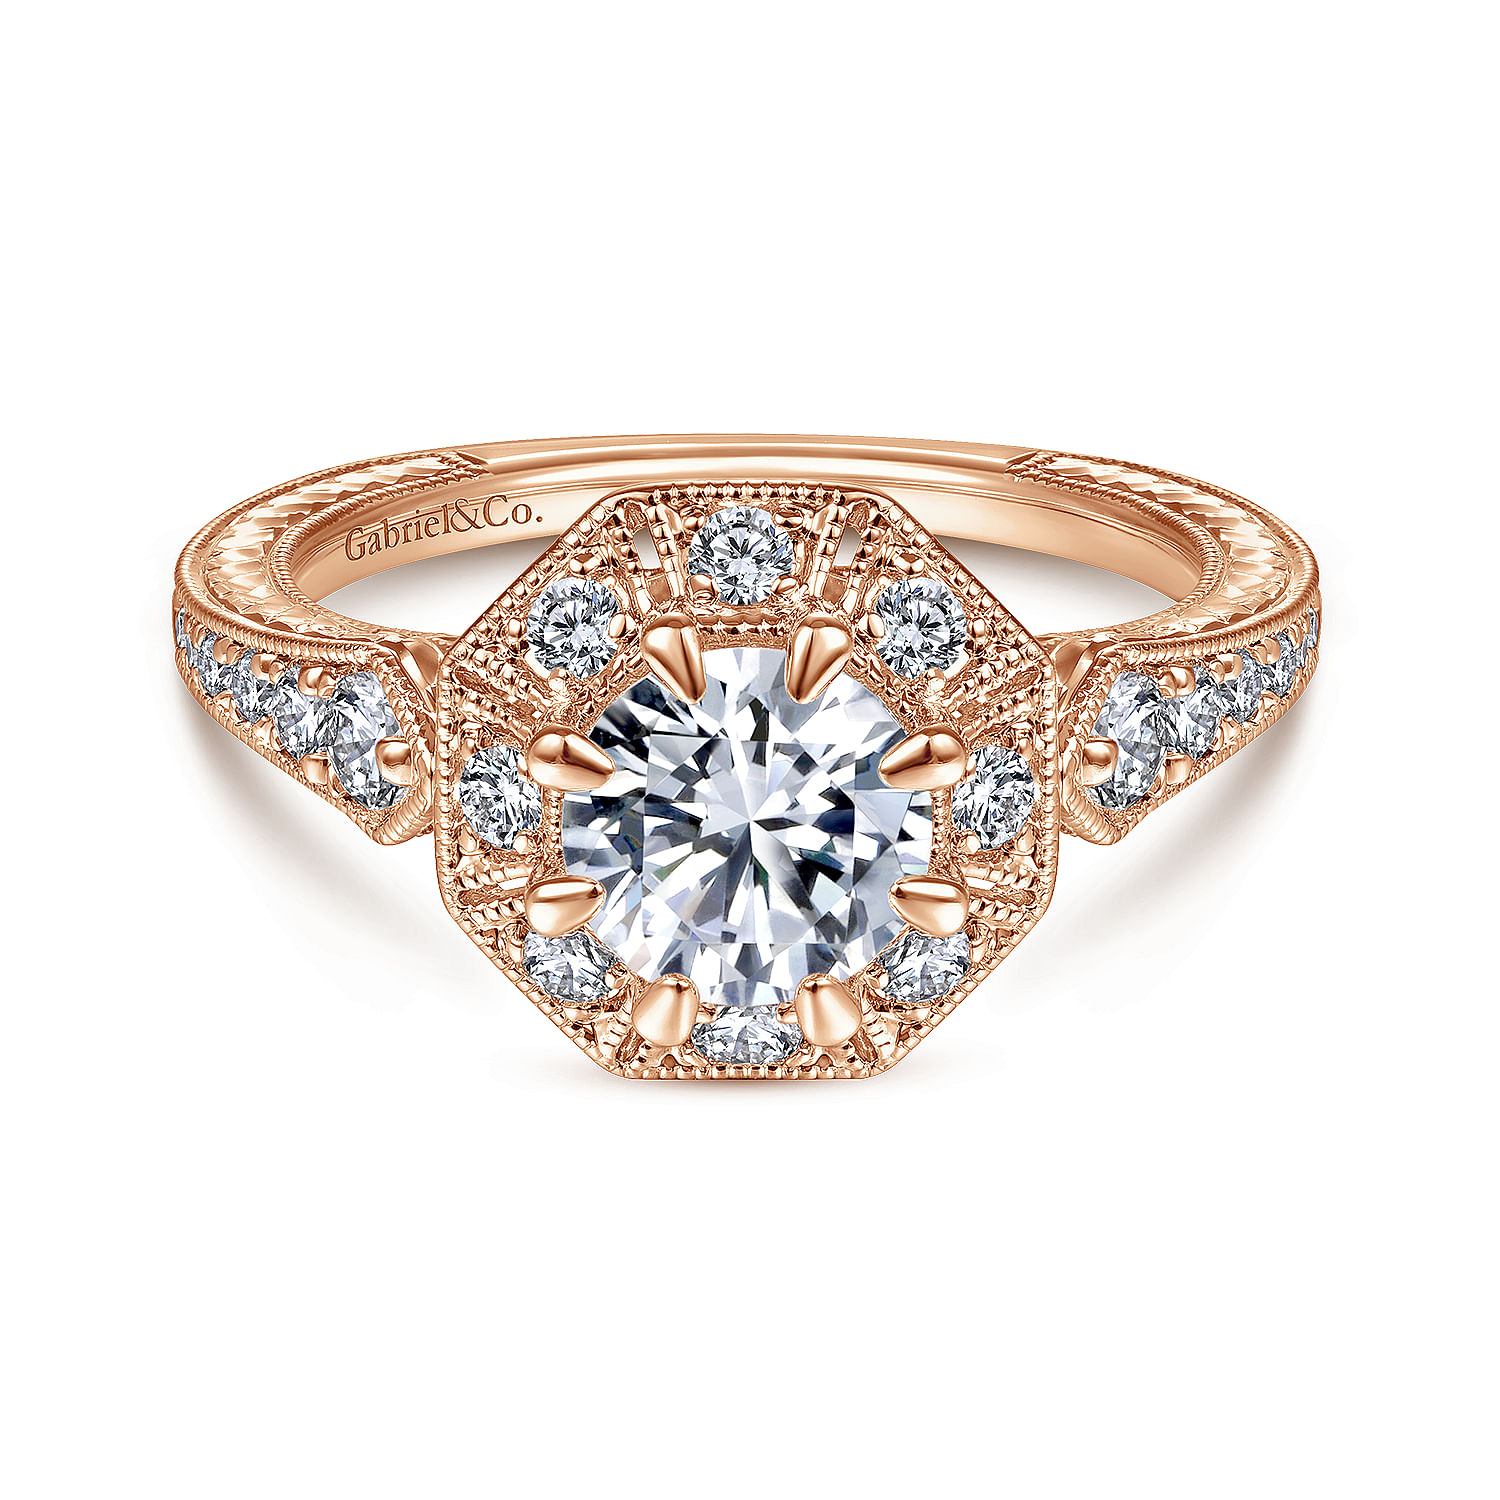 Cleary - Art Deco 14K Rose Gold Octagonal Halo Diamond Engagement Ring